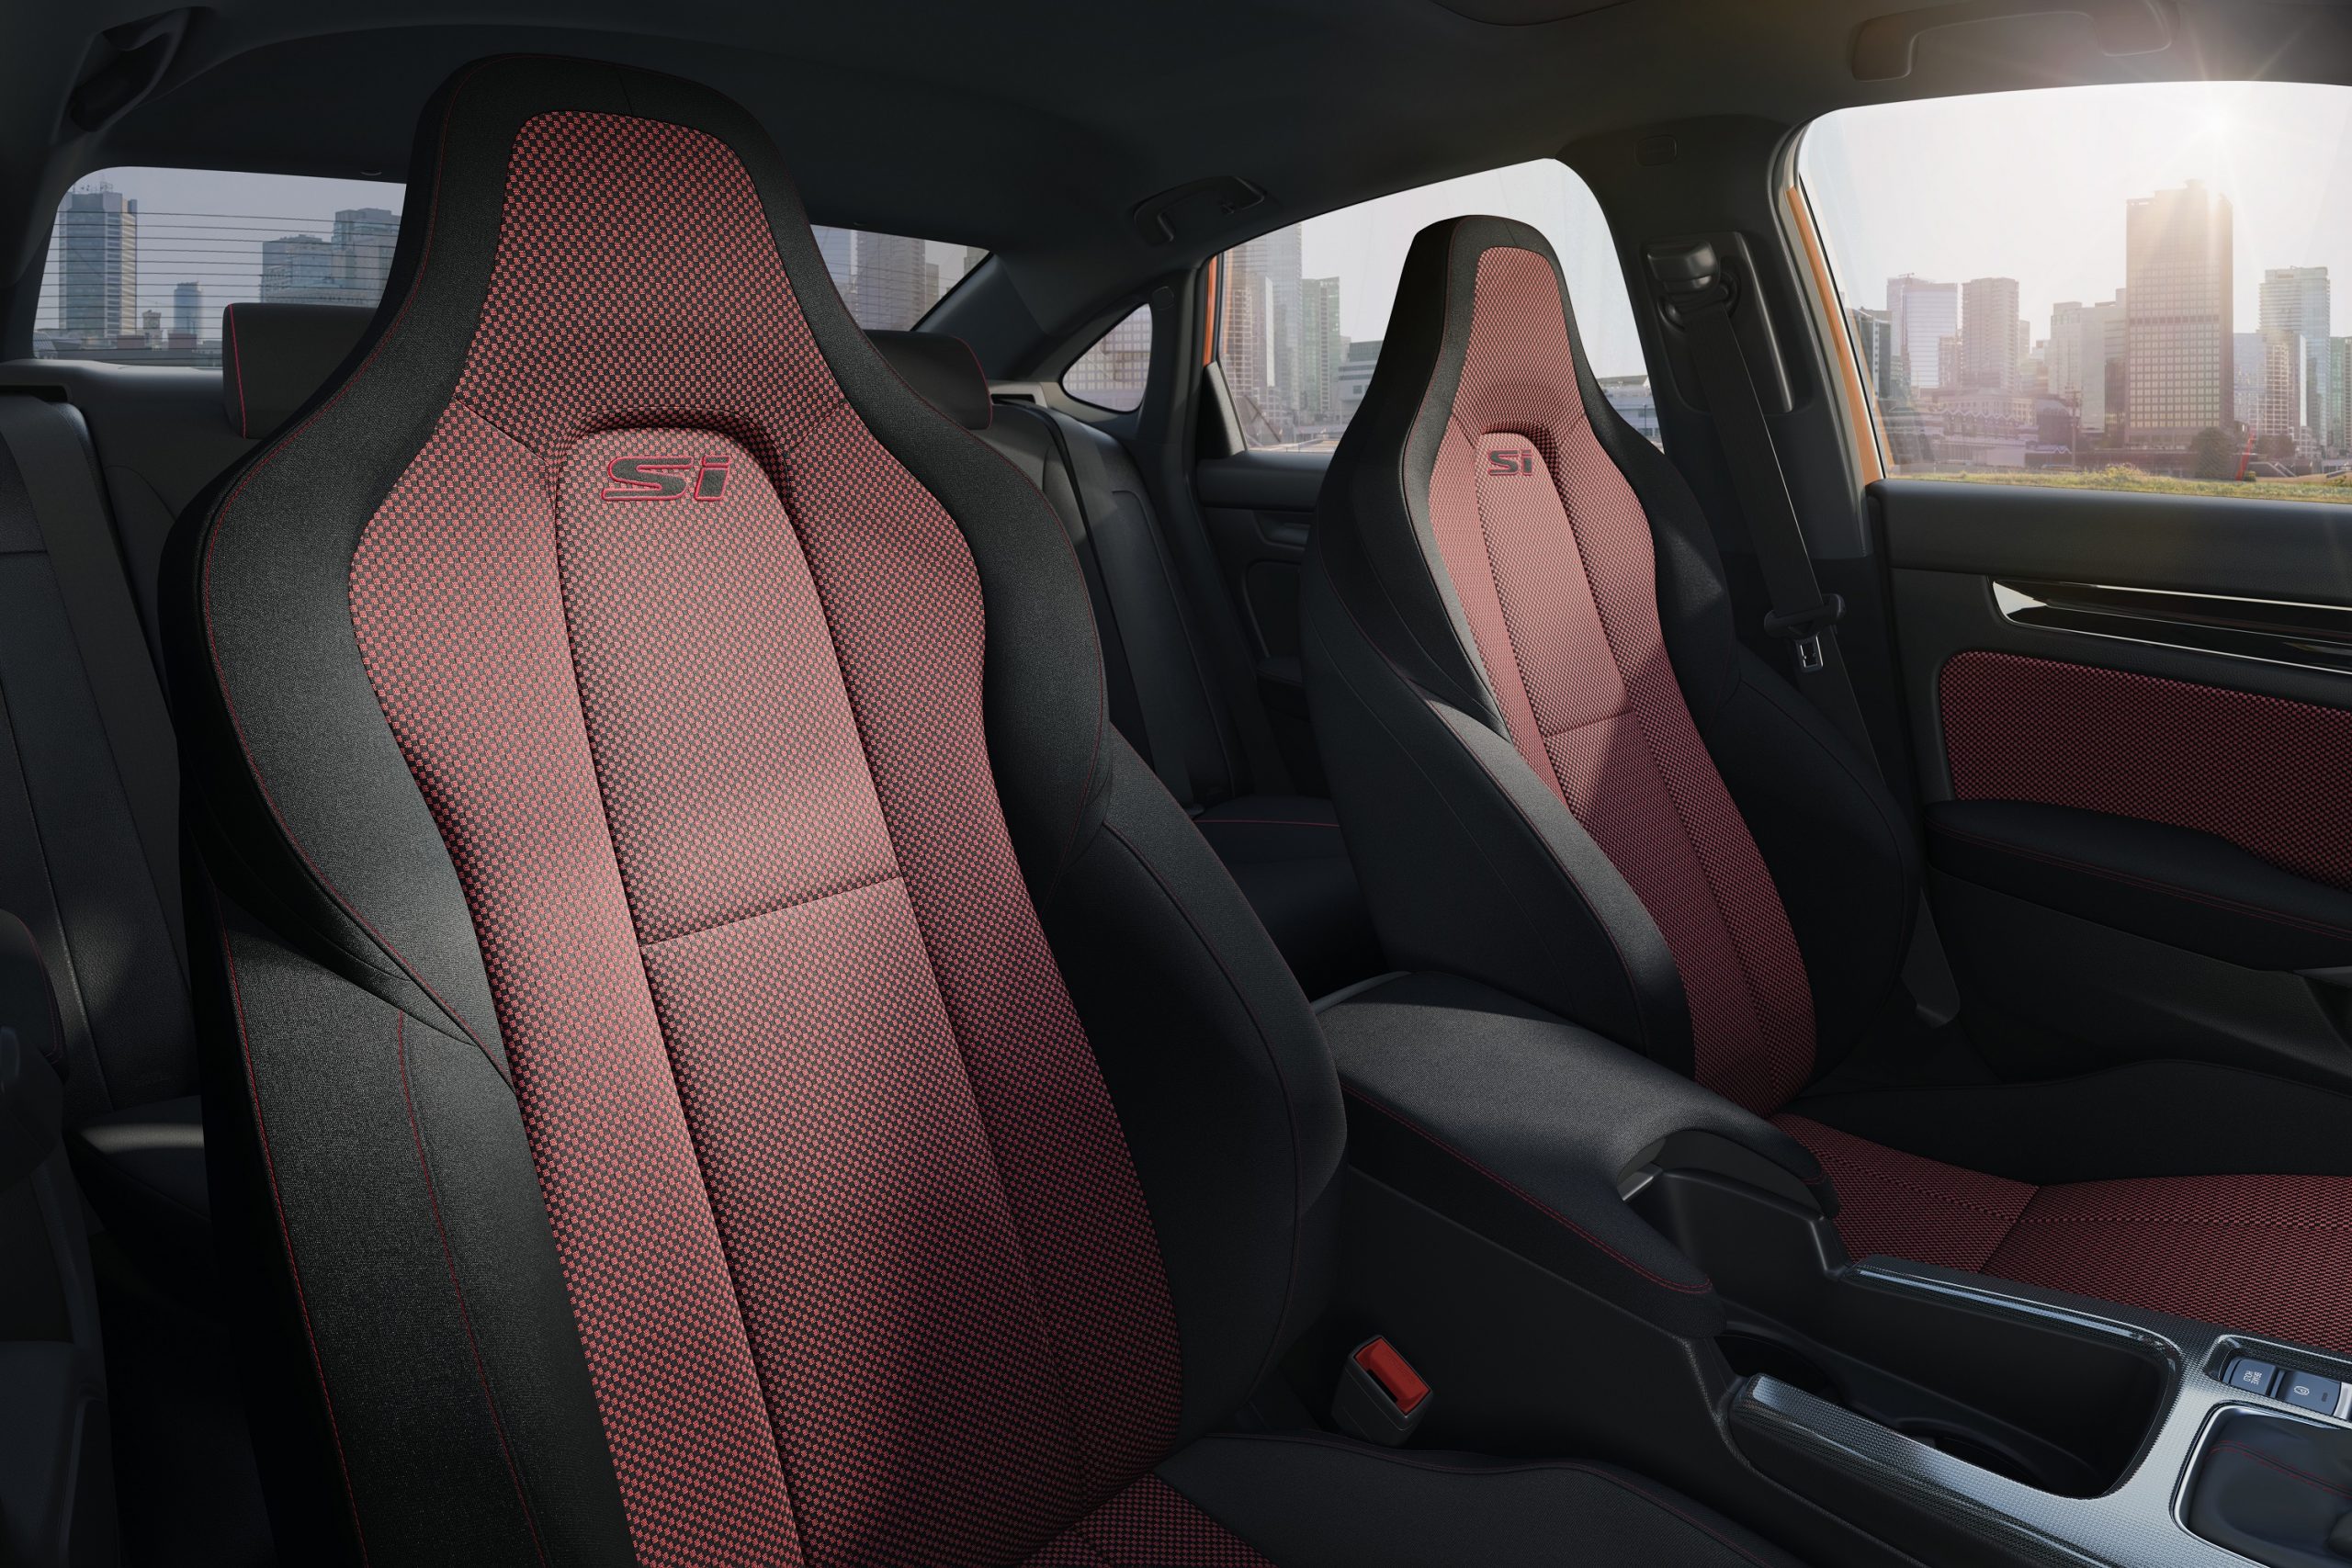 The red seats of the new Civic Si